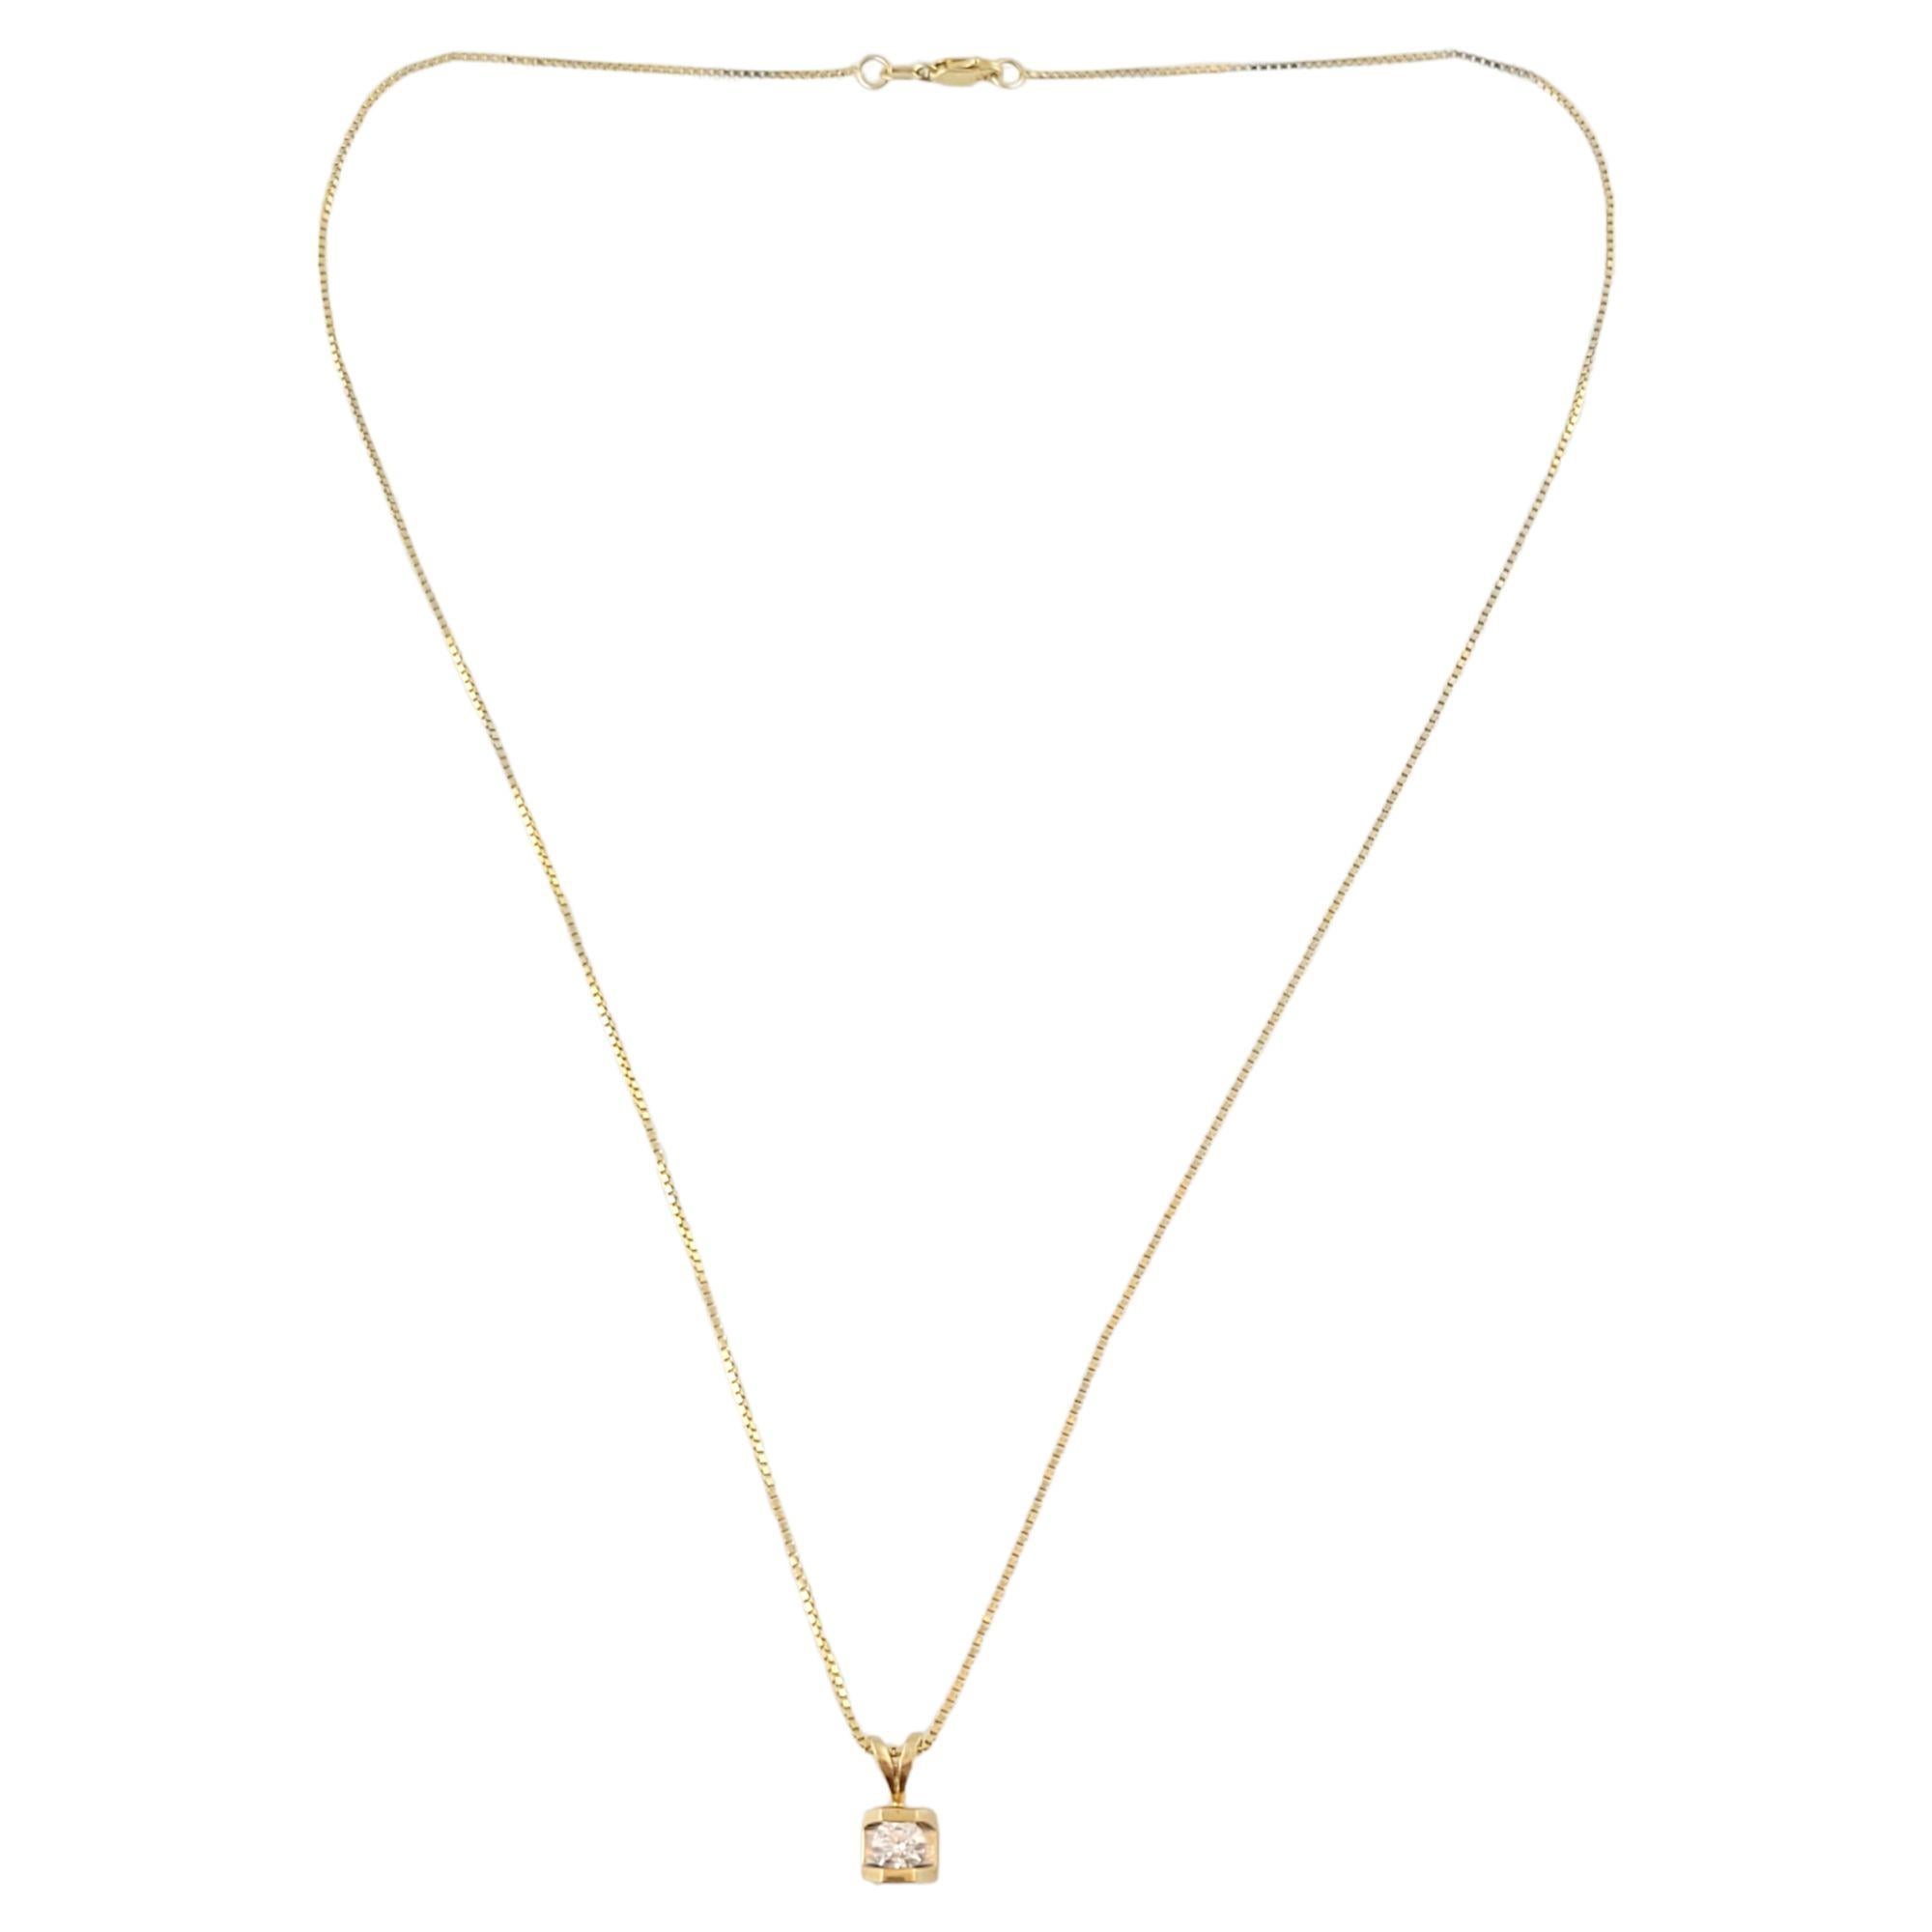 Vintage 14K Yellow Gold Single Diamond Pendant With Chain

Gorgeous 14K gold chain paired with a beautiful round brilliant cut diamond pendant!

Approximate total diamond weight: 0.25 cts

Diamond clarity: VS2

Diamond color: G

Chain length: 18